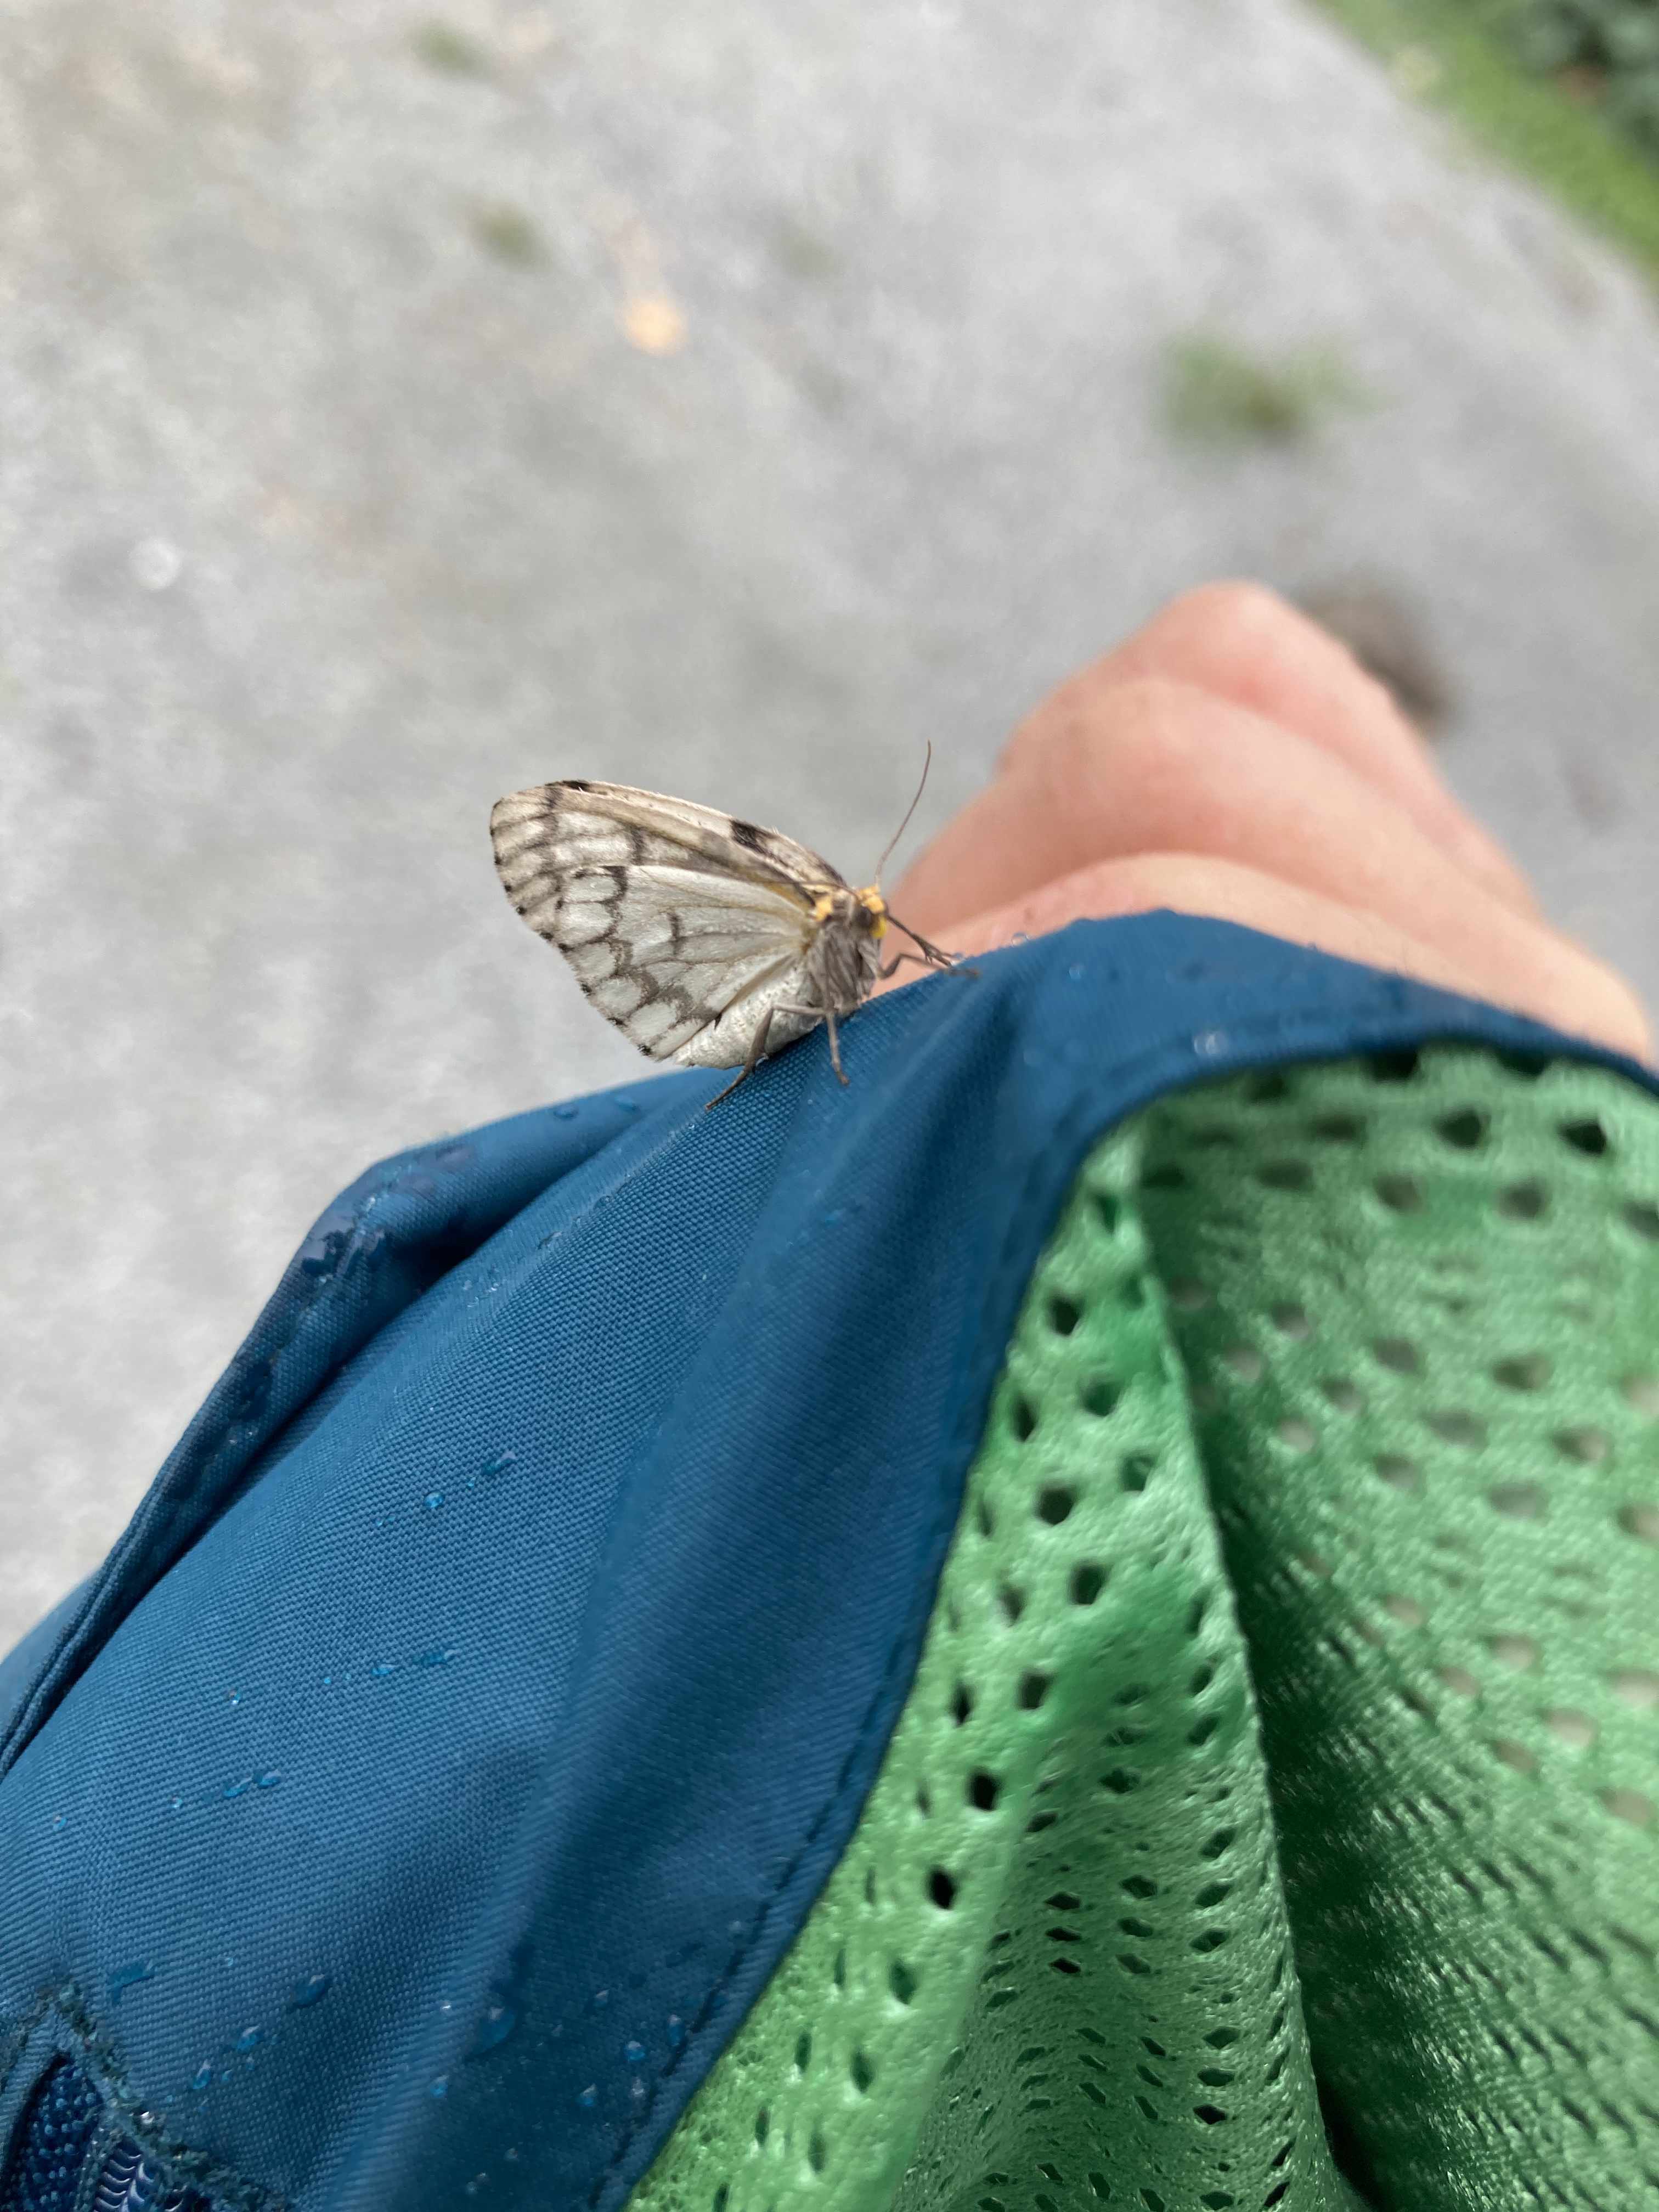 a moth that landed on a jacket. the moth has large iridescent wings